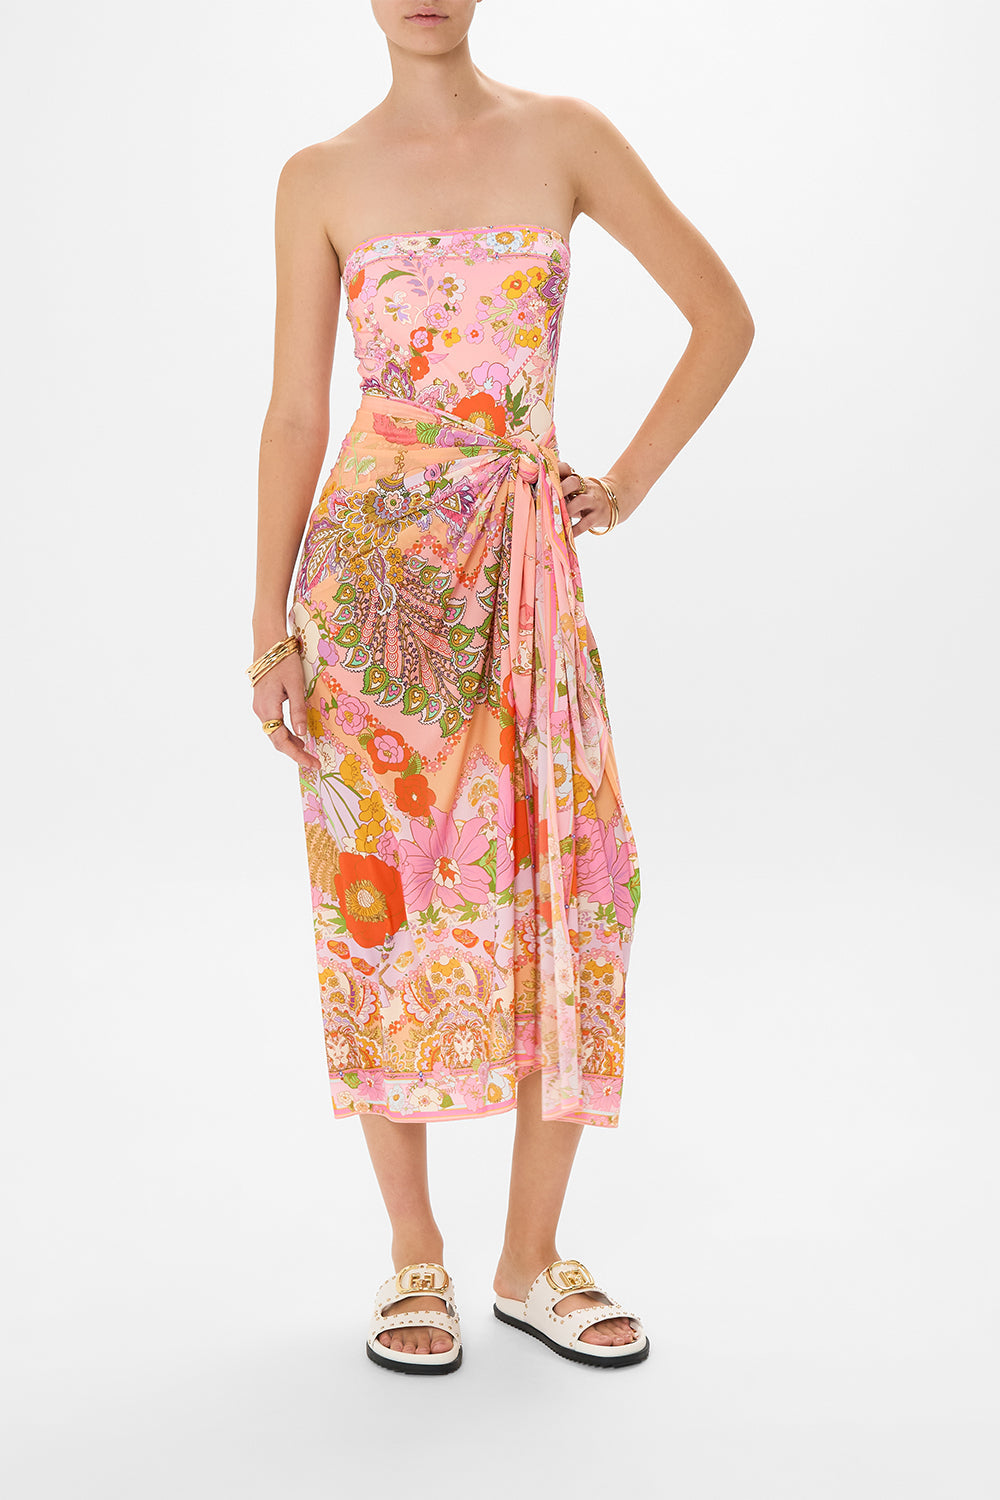 CAMILLA resortwear sarong in Clever Clogs print